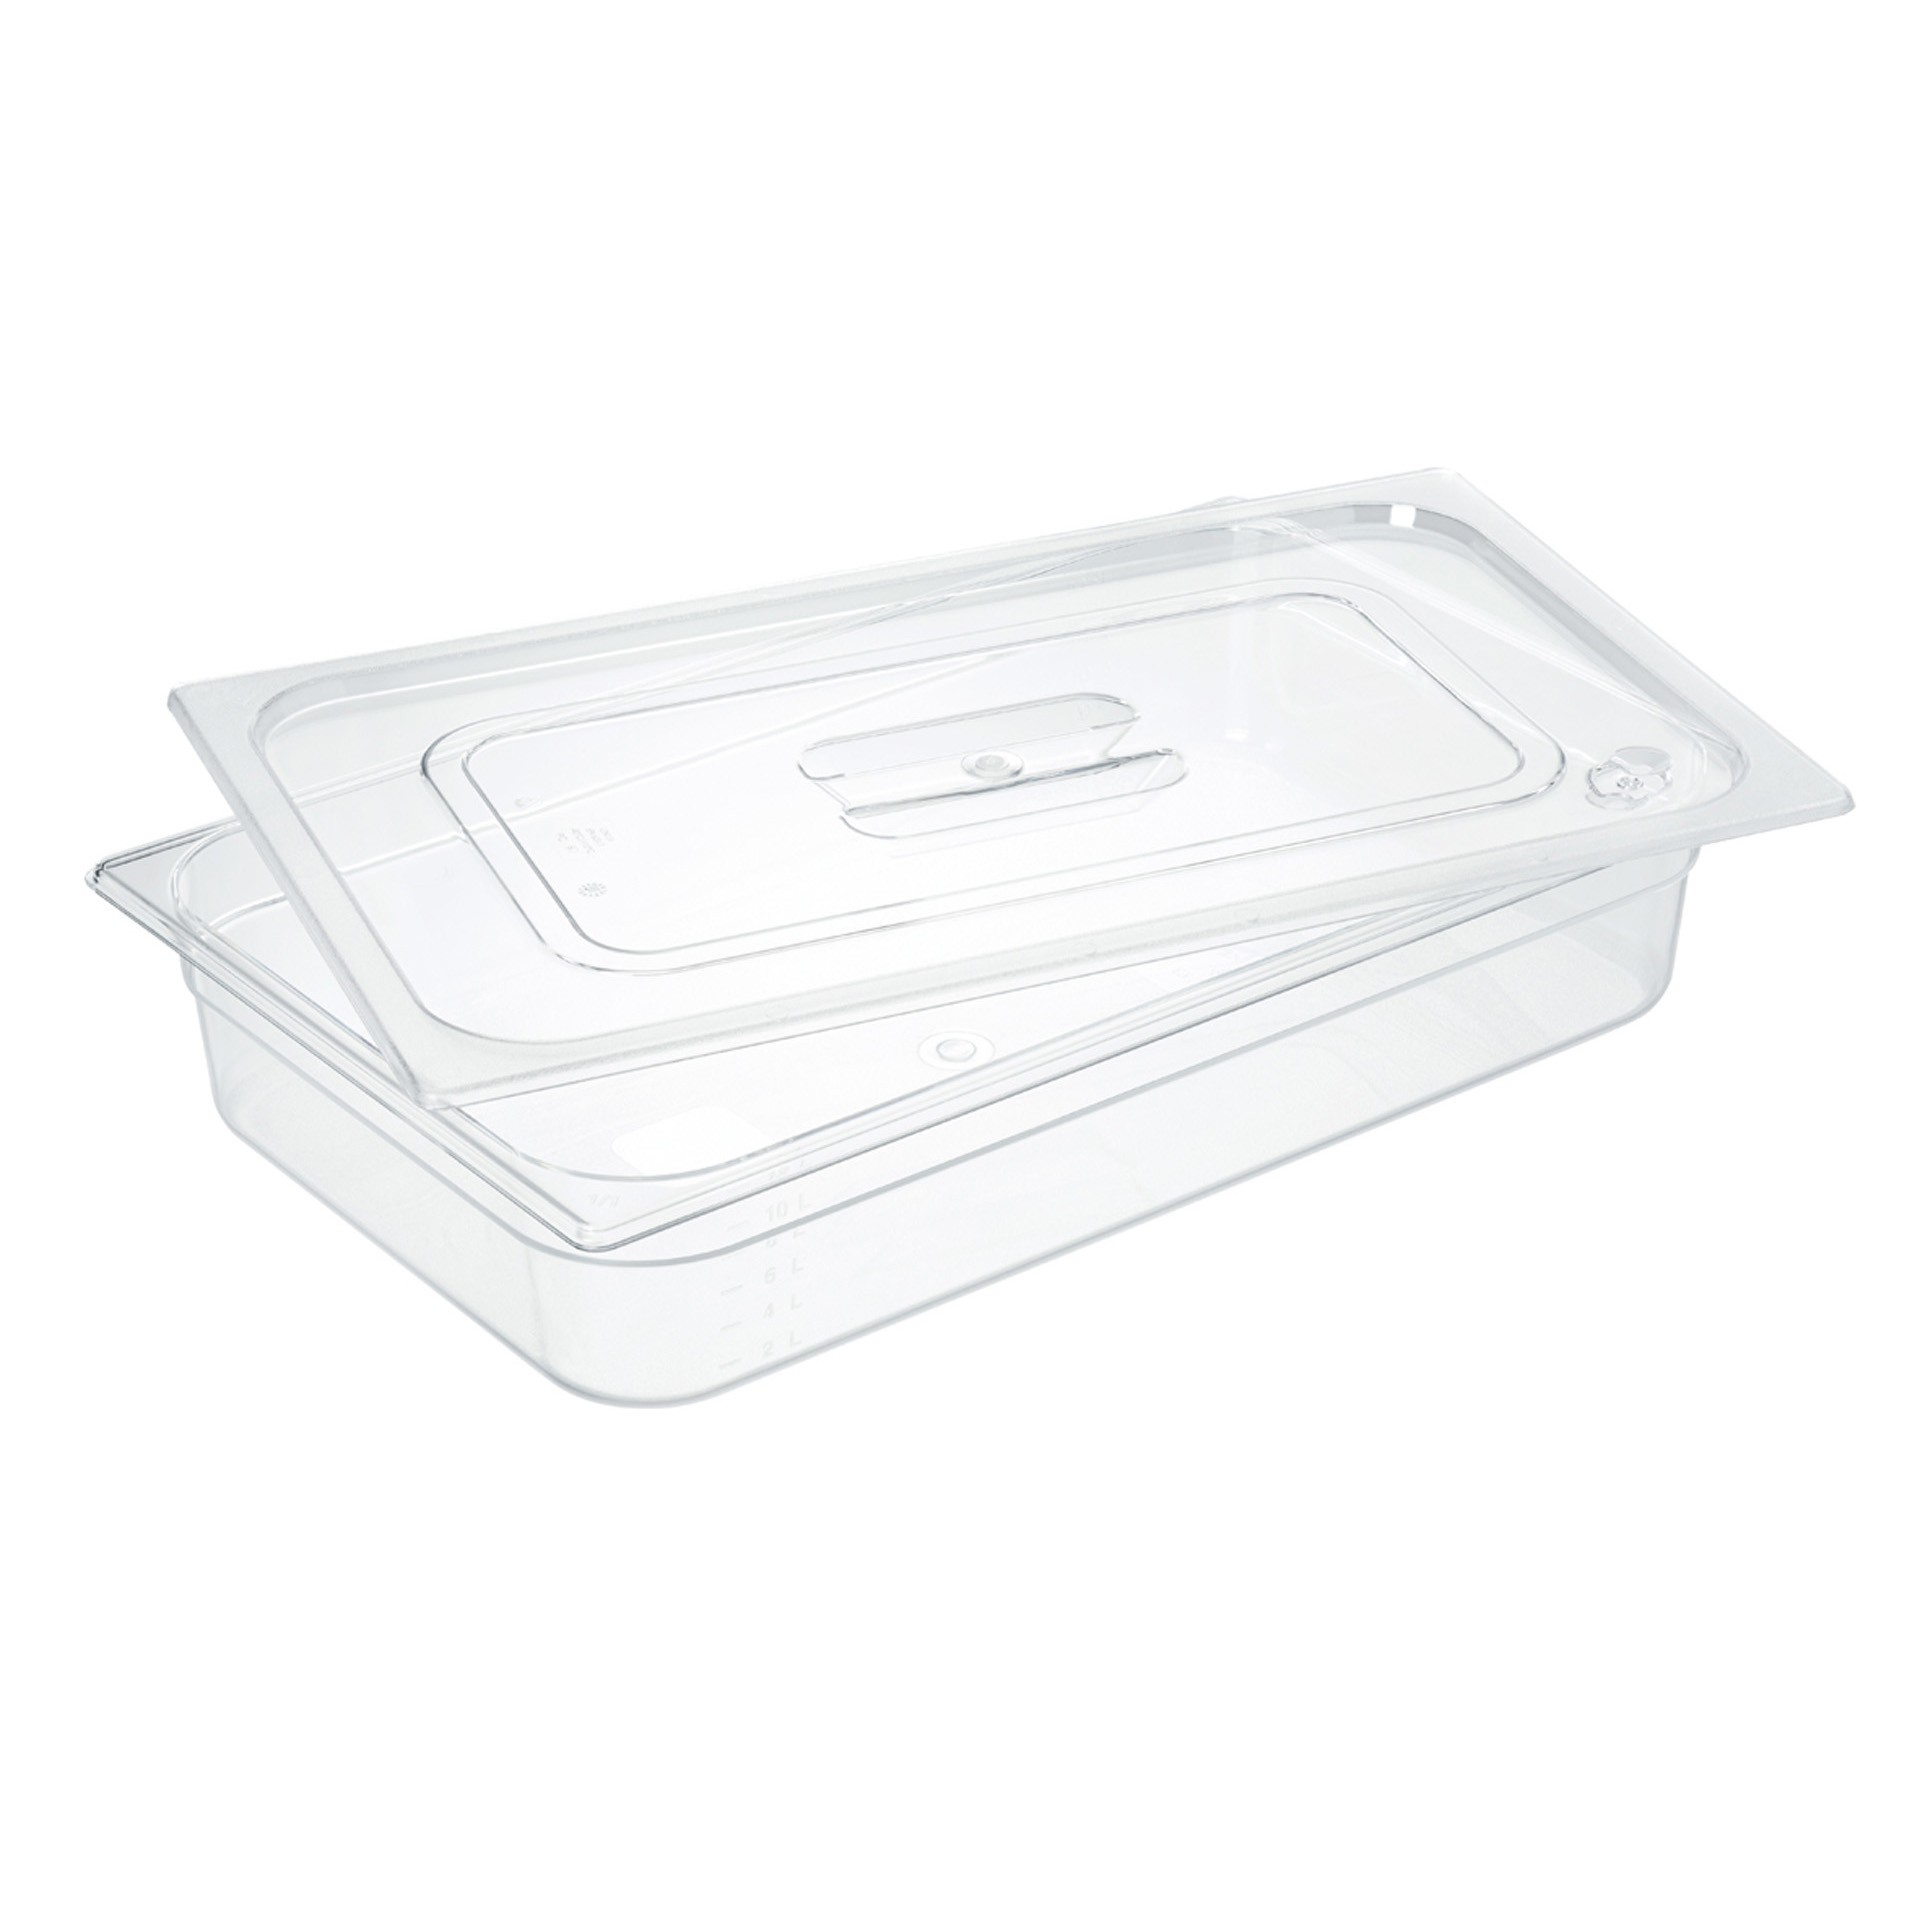 Gastronormbehälter NEW MODEL Polycarbonat weiß GN 1/3 325 x 175 x 65 mm 2,5 L 